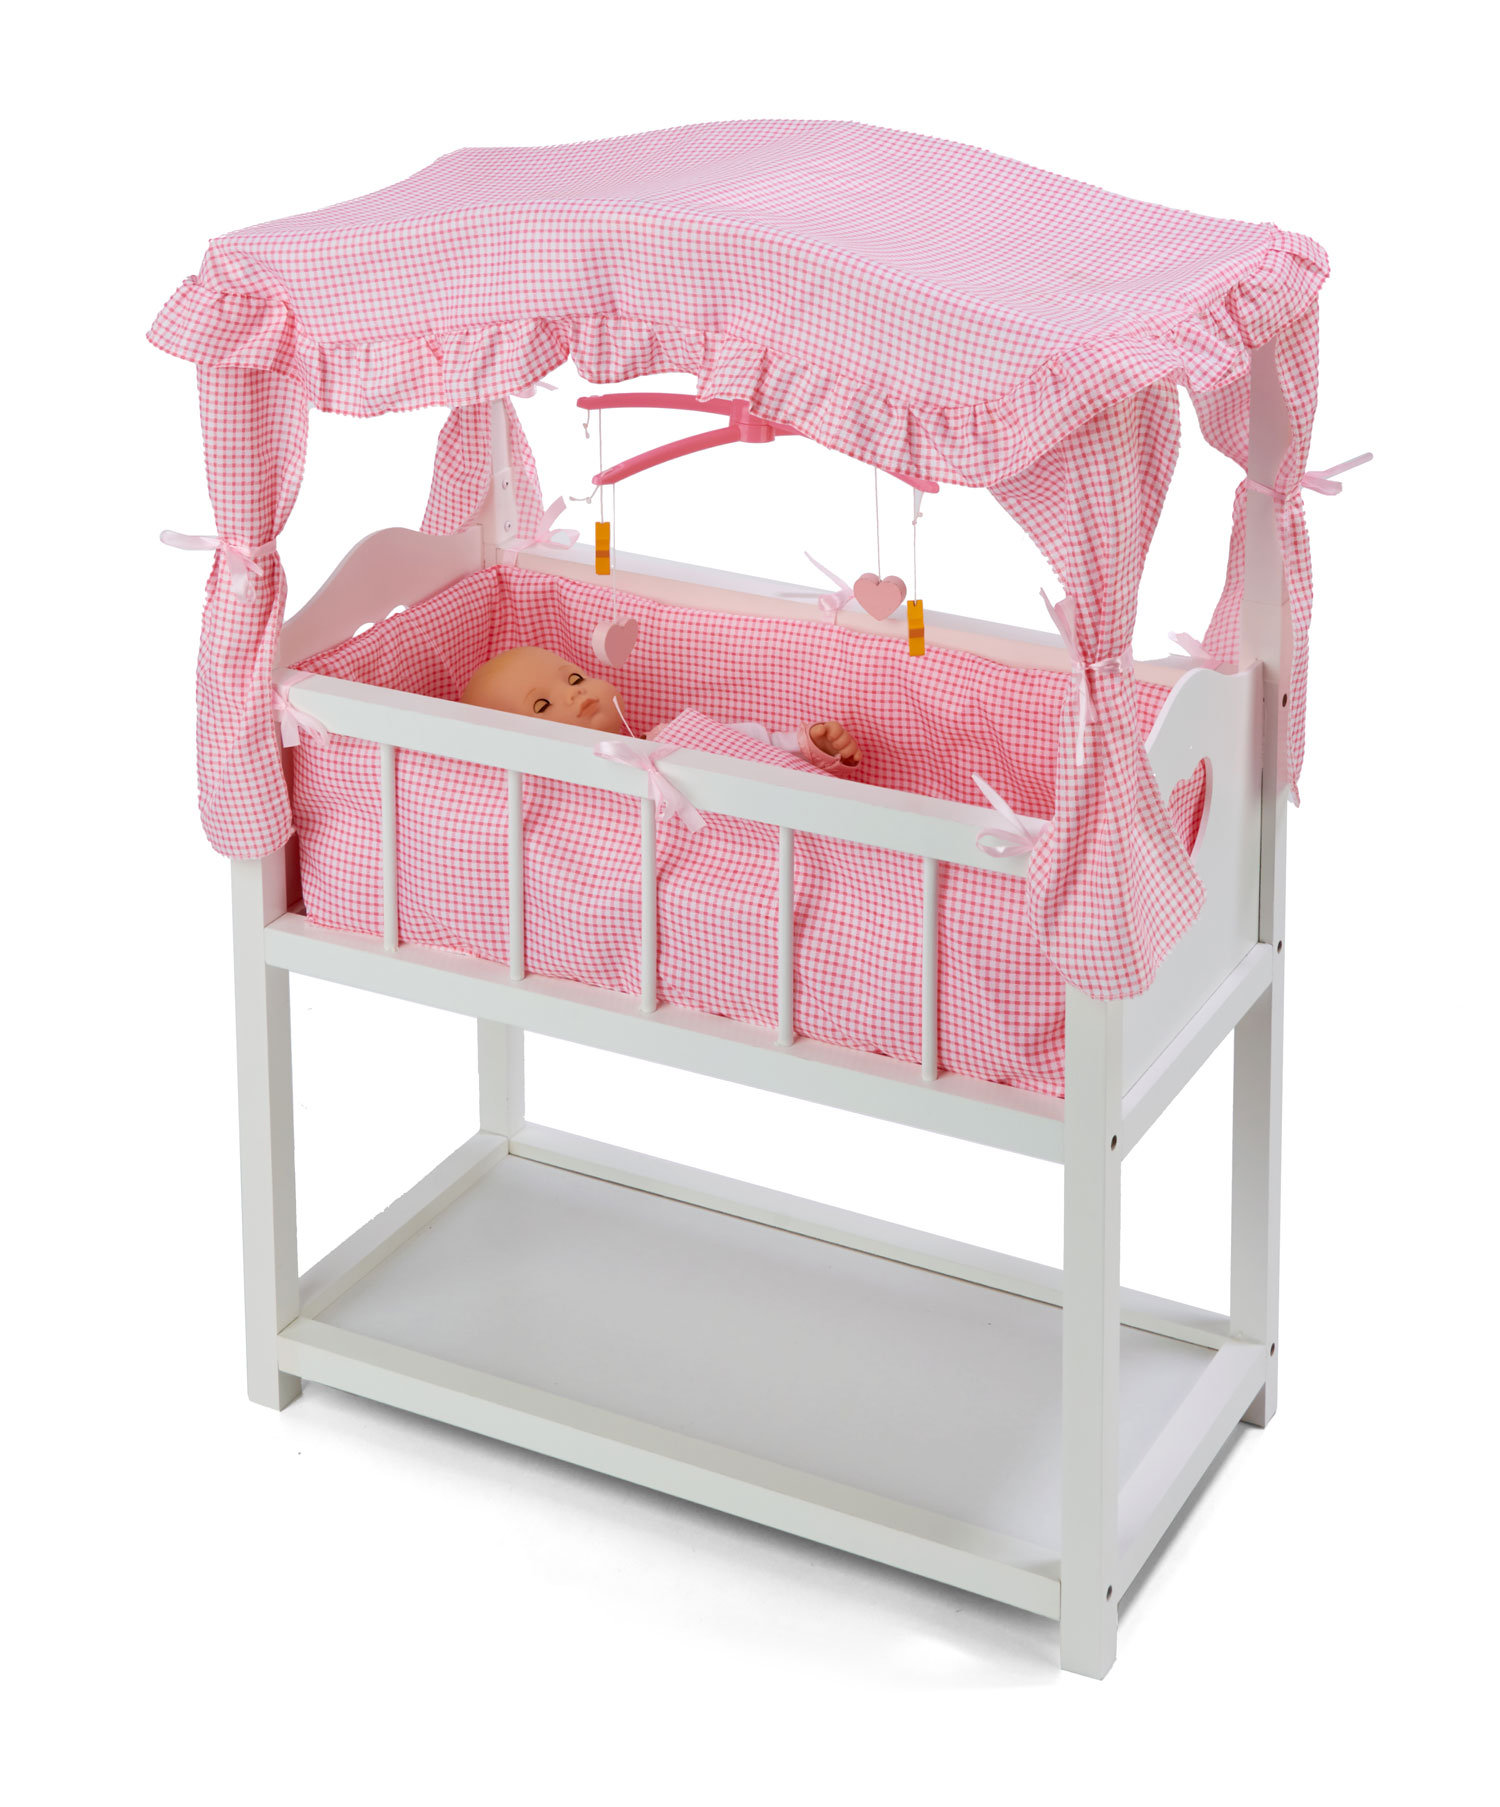 Majesty Baby Bassinet w/ Canopy in White/Pink Bedding - Badger